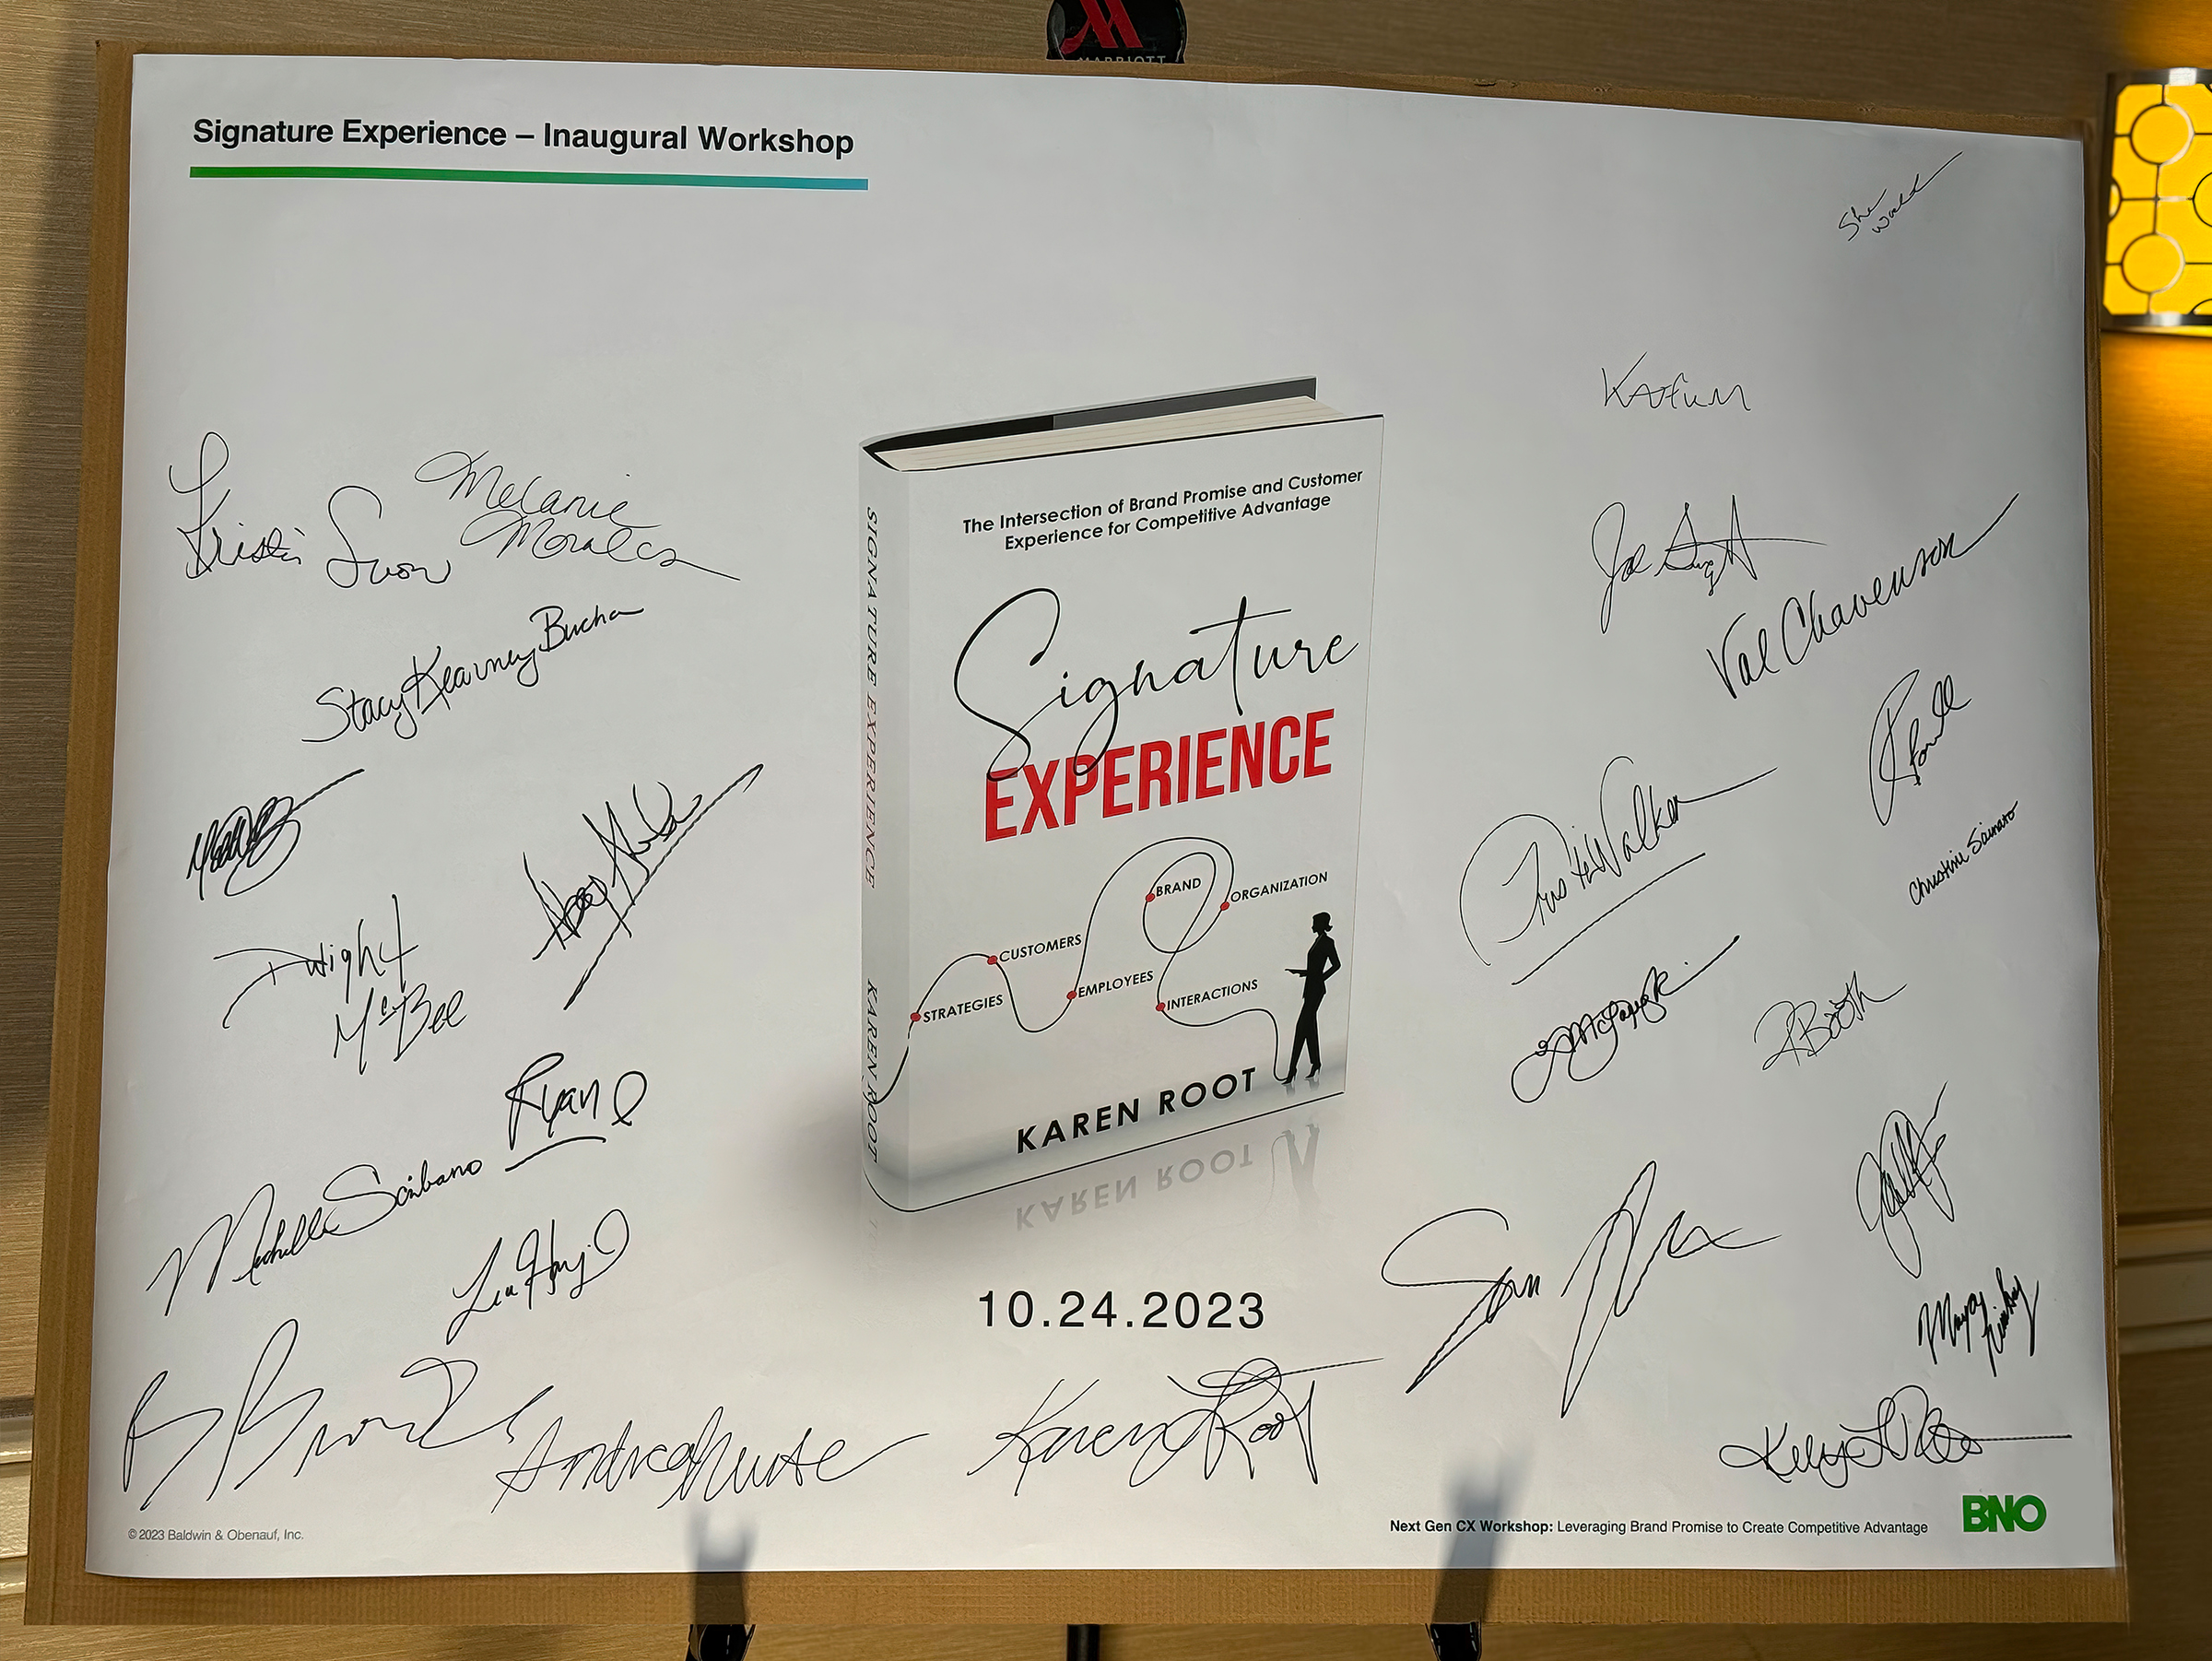 A signed poster of Karen Root’s newly published book, Signature Experience: The Intersection of Brand Promise and Customer Experience for Competitive Advantage.